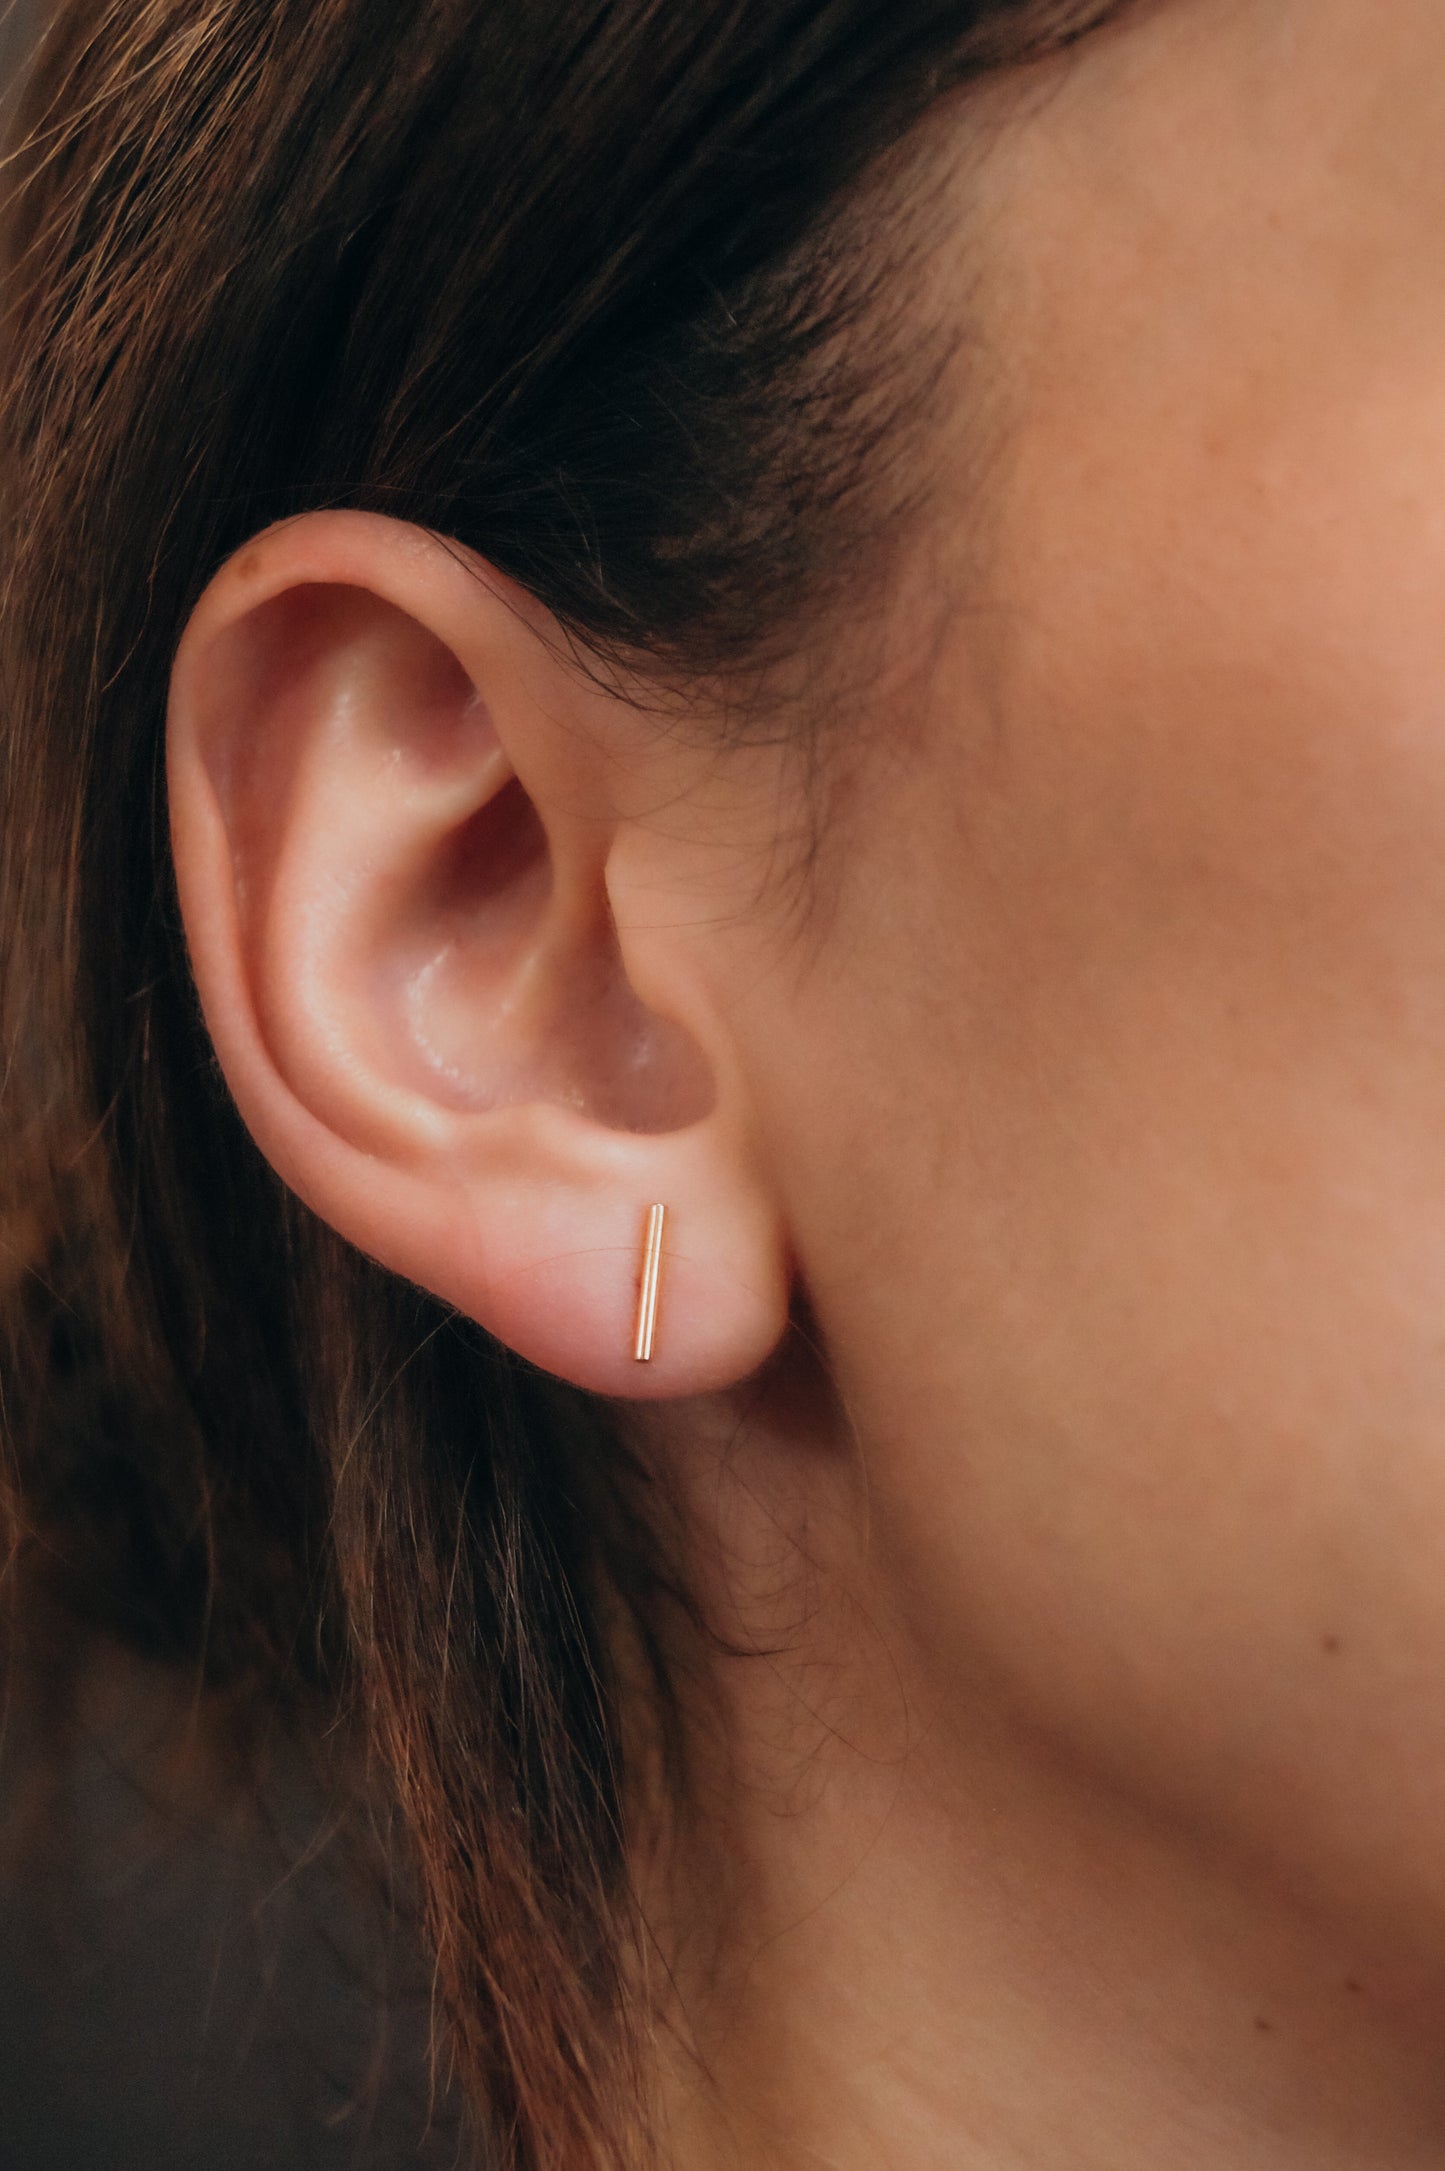 Mini Bar Stud Earrings in Solid Gold or Rose Gold